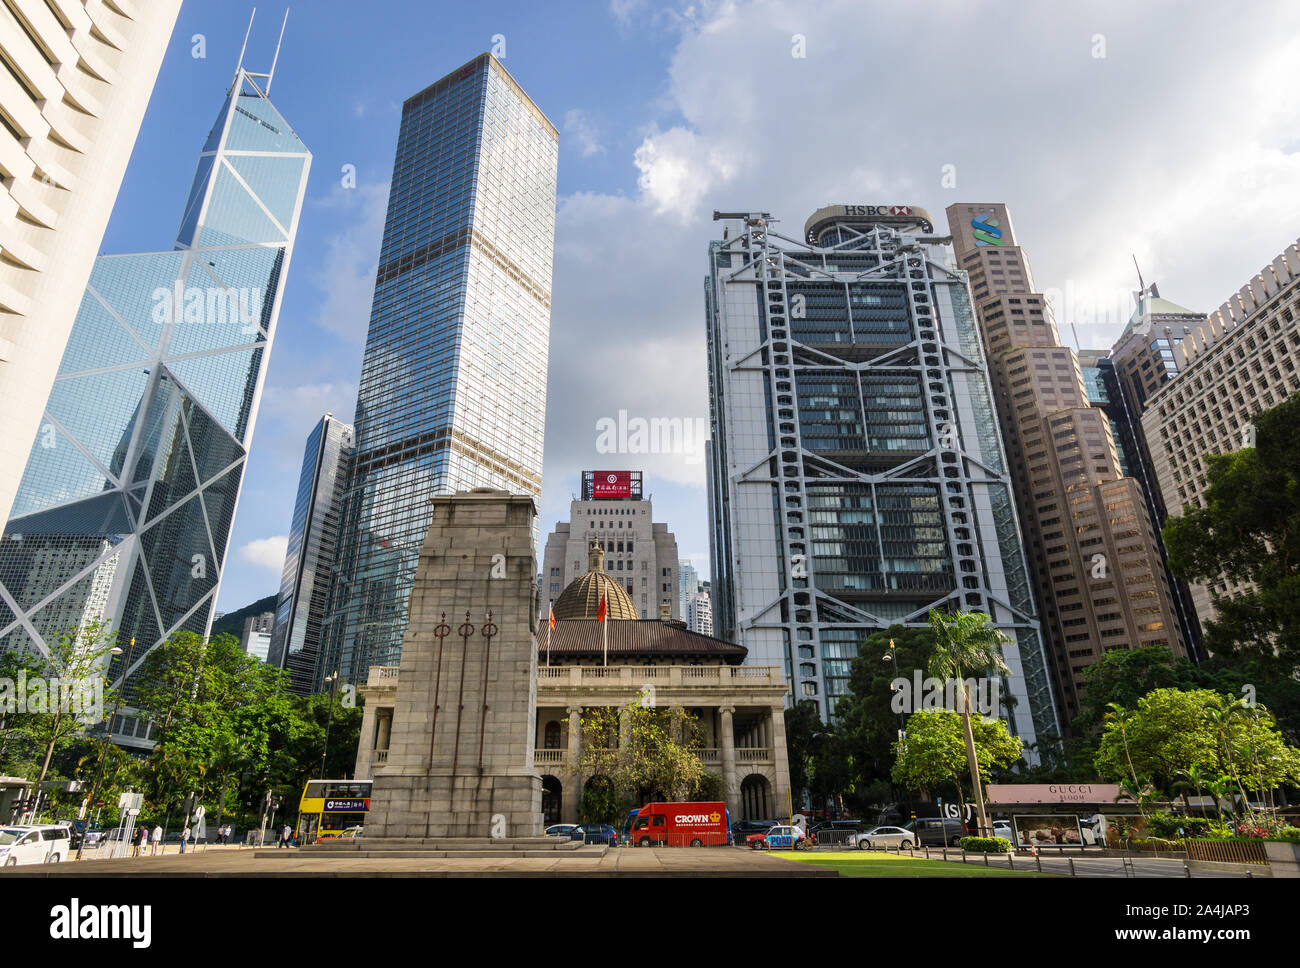 Hong Kong, China - May 27 2019: Modern skyscrapers of major banks such as HSBC and Bank of China contrast with colonial buildings, the Cenotaph and th Stock Photo